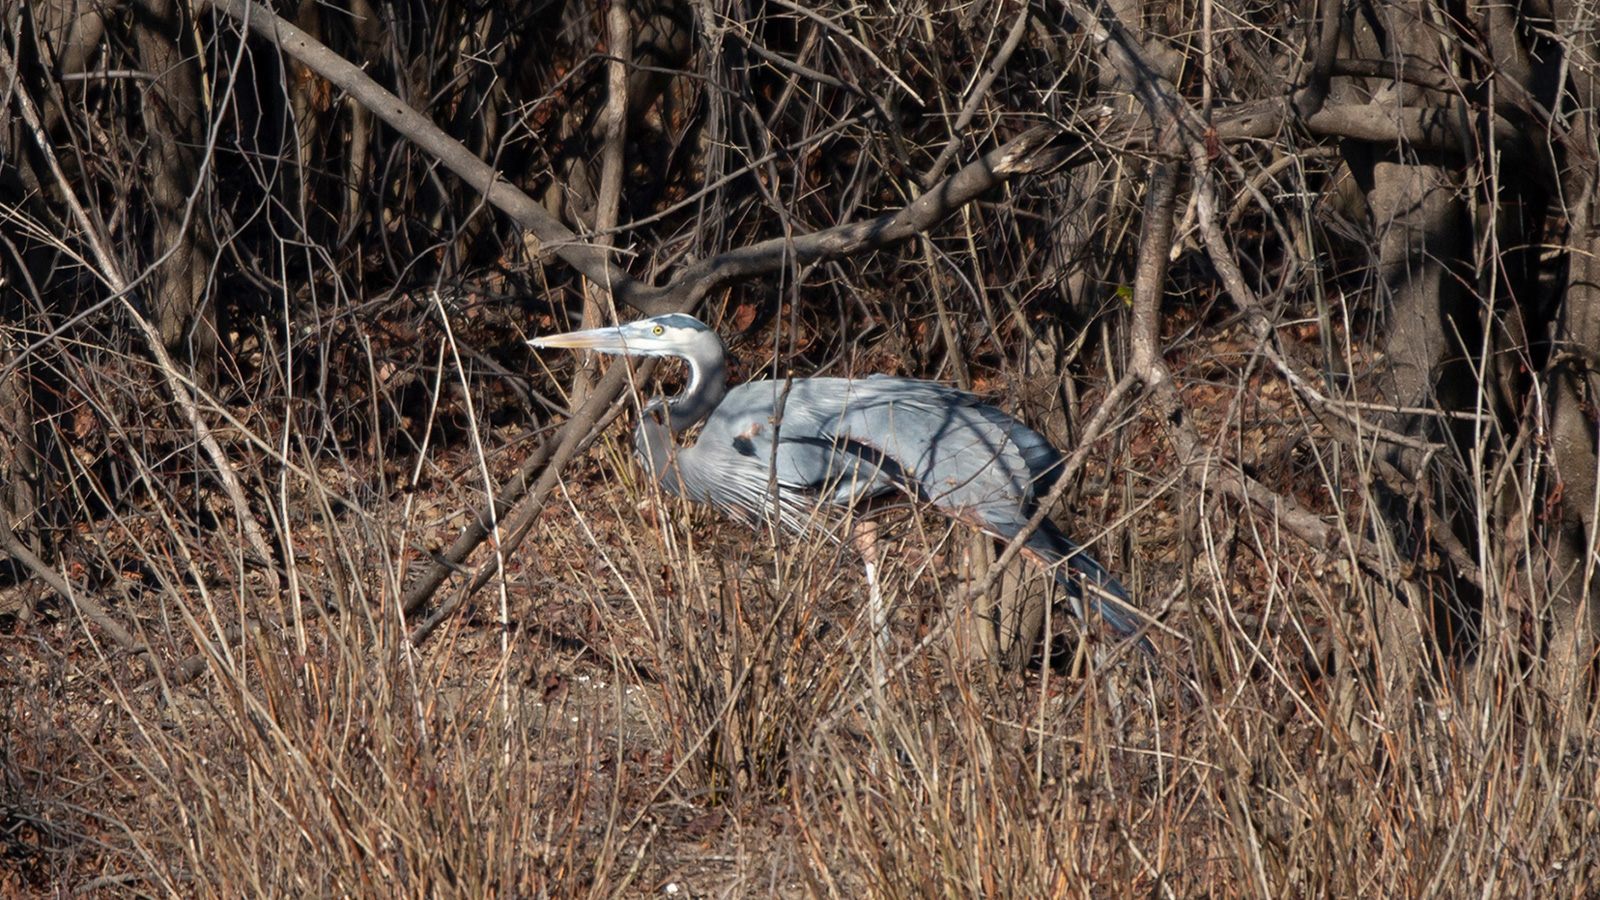 Great blue heron standing in tall grass